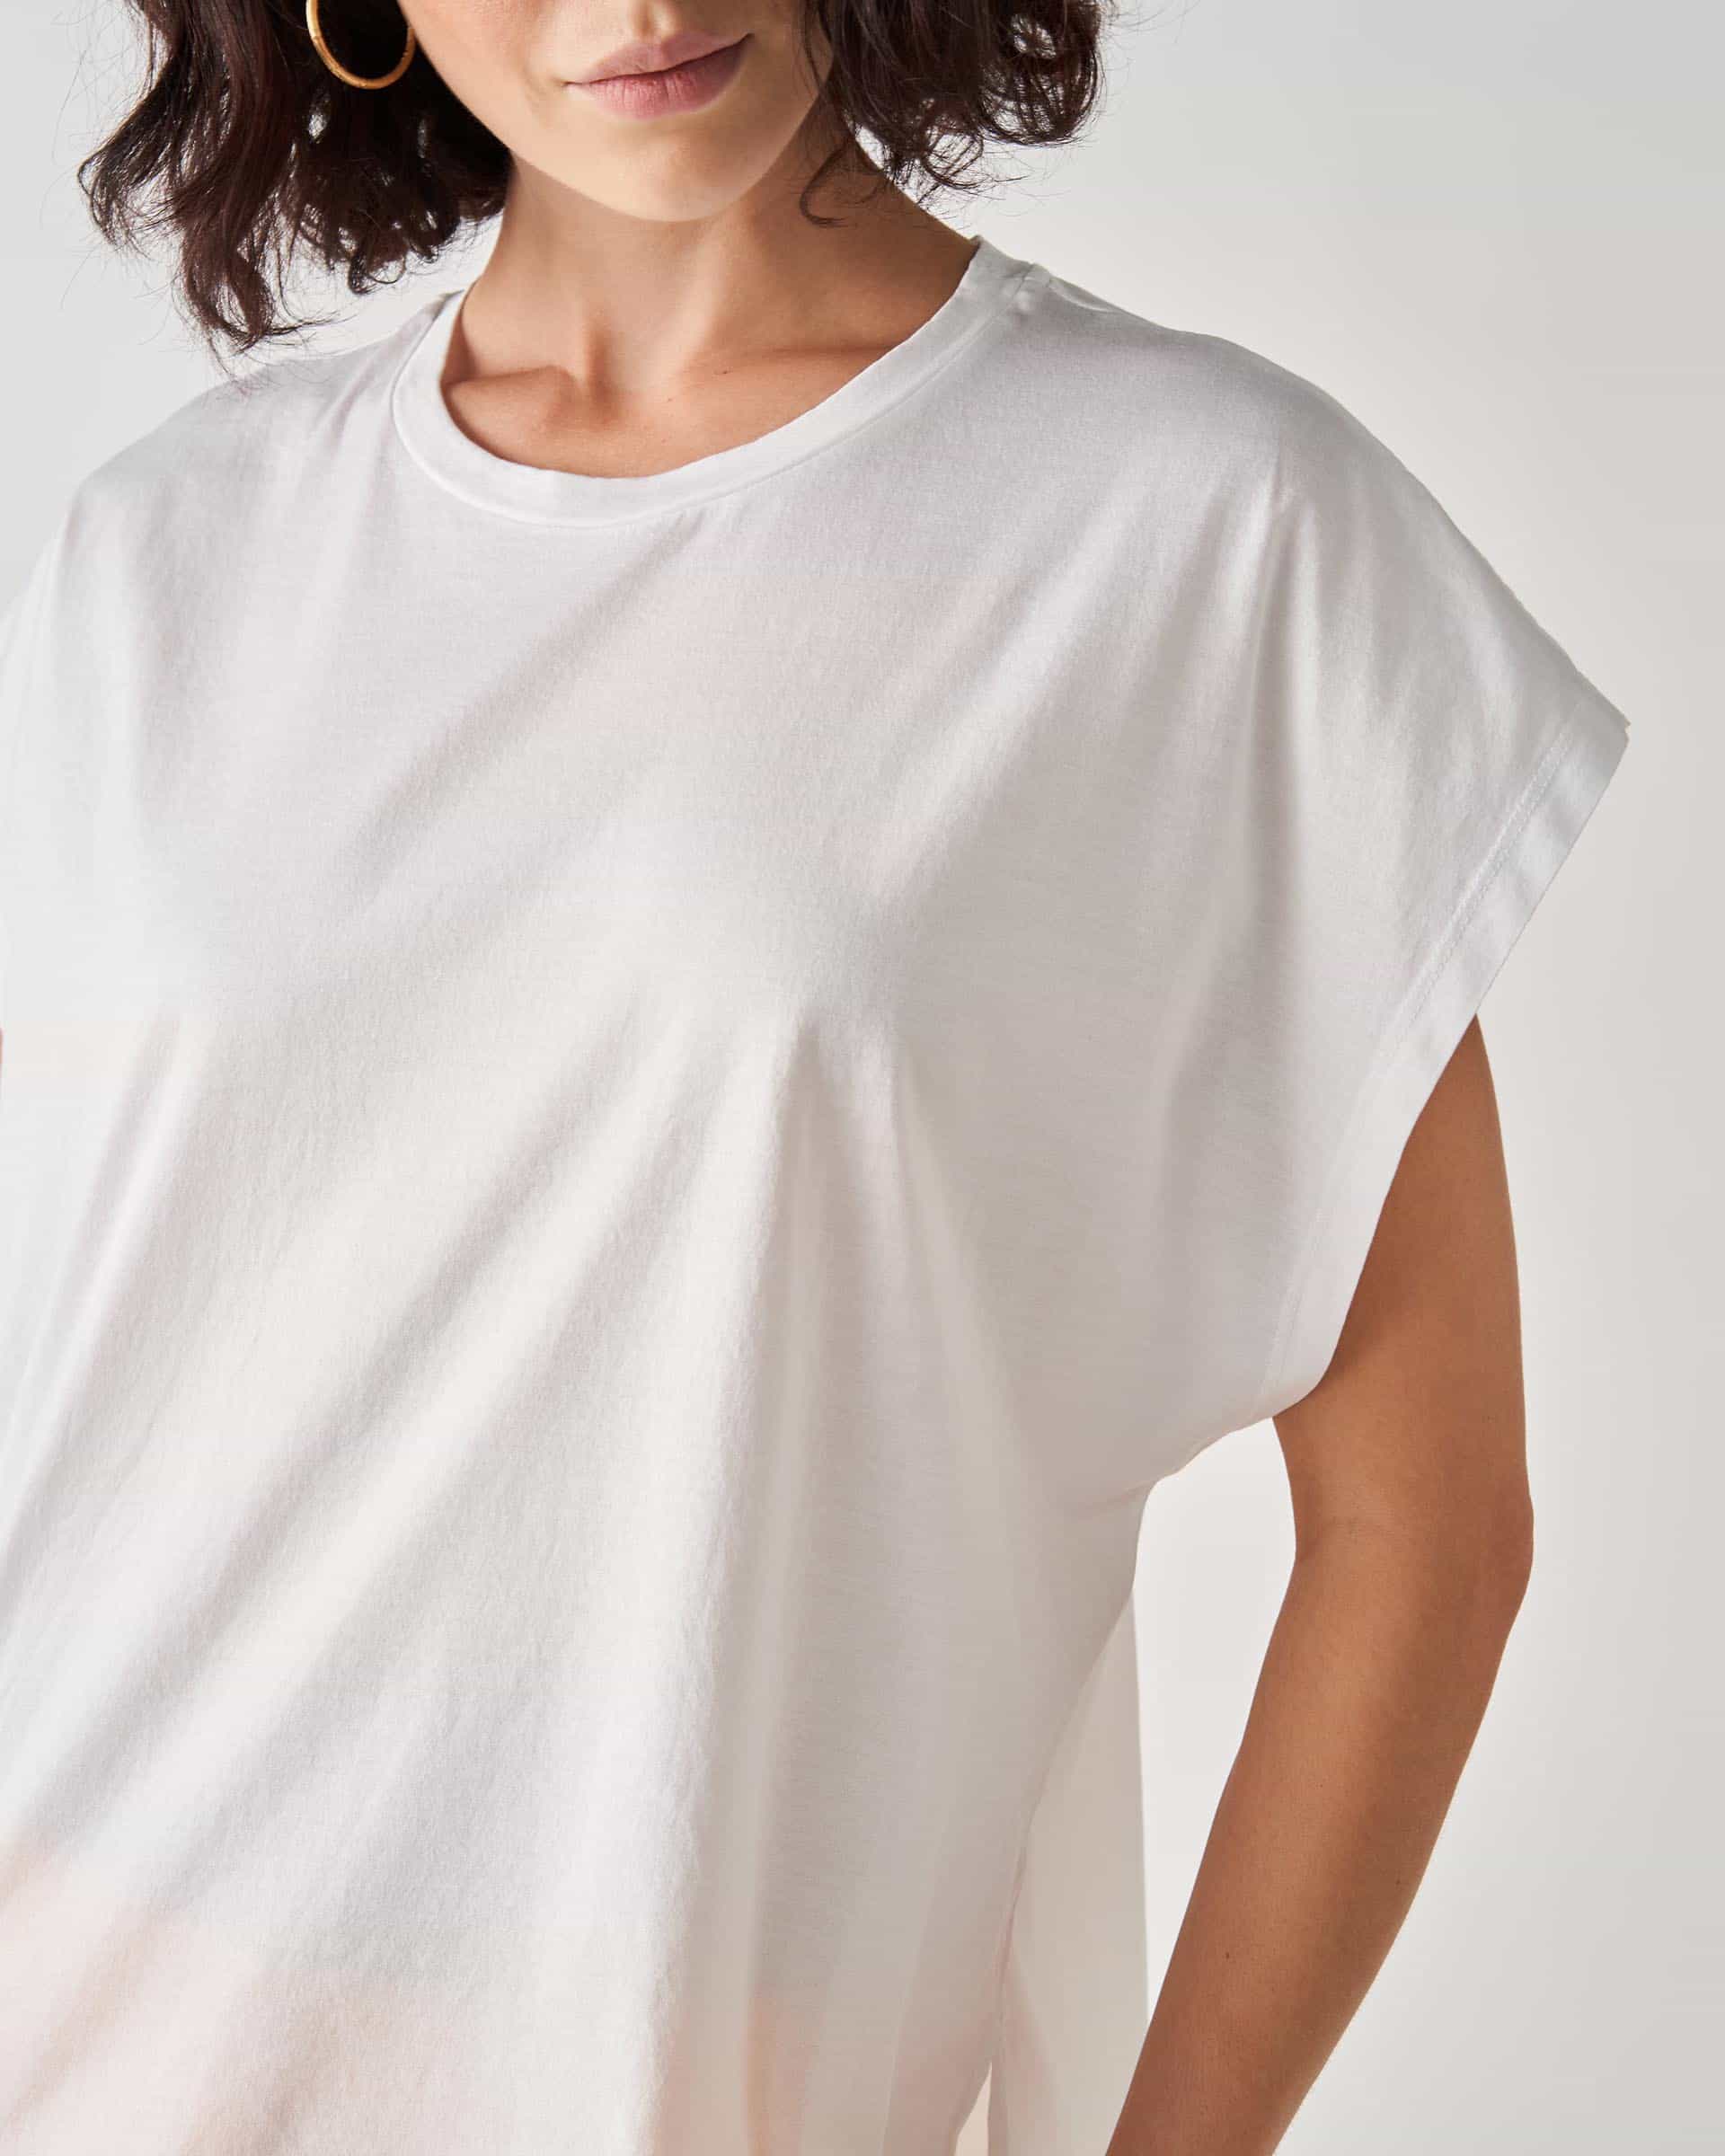 The Market Store | Crewneck T-shirt With Slits